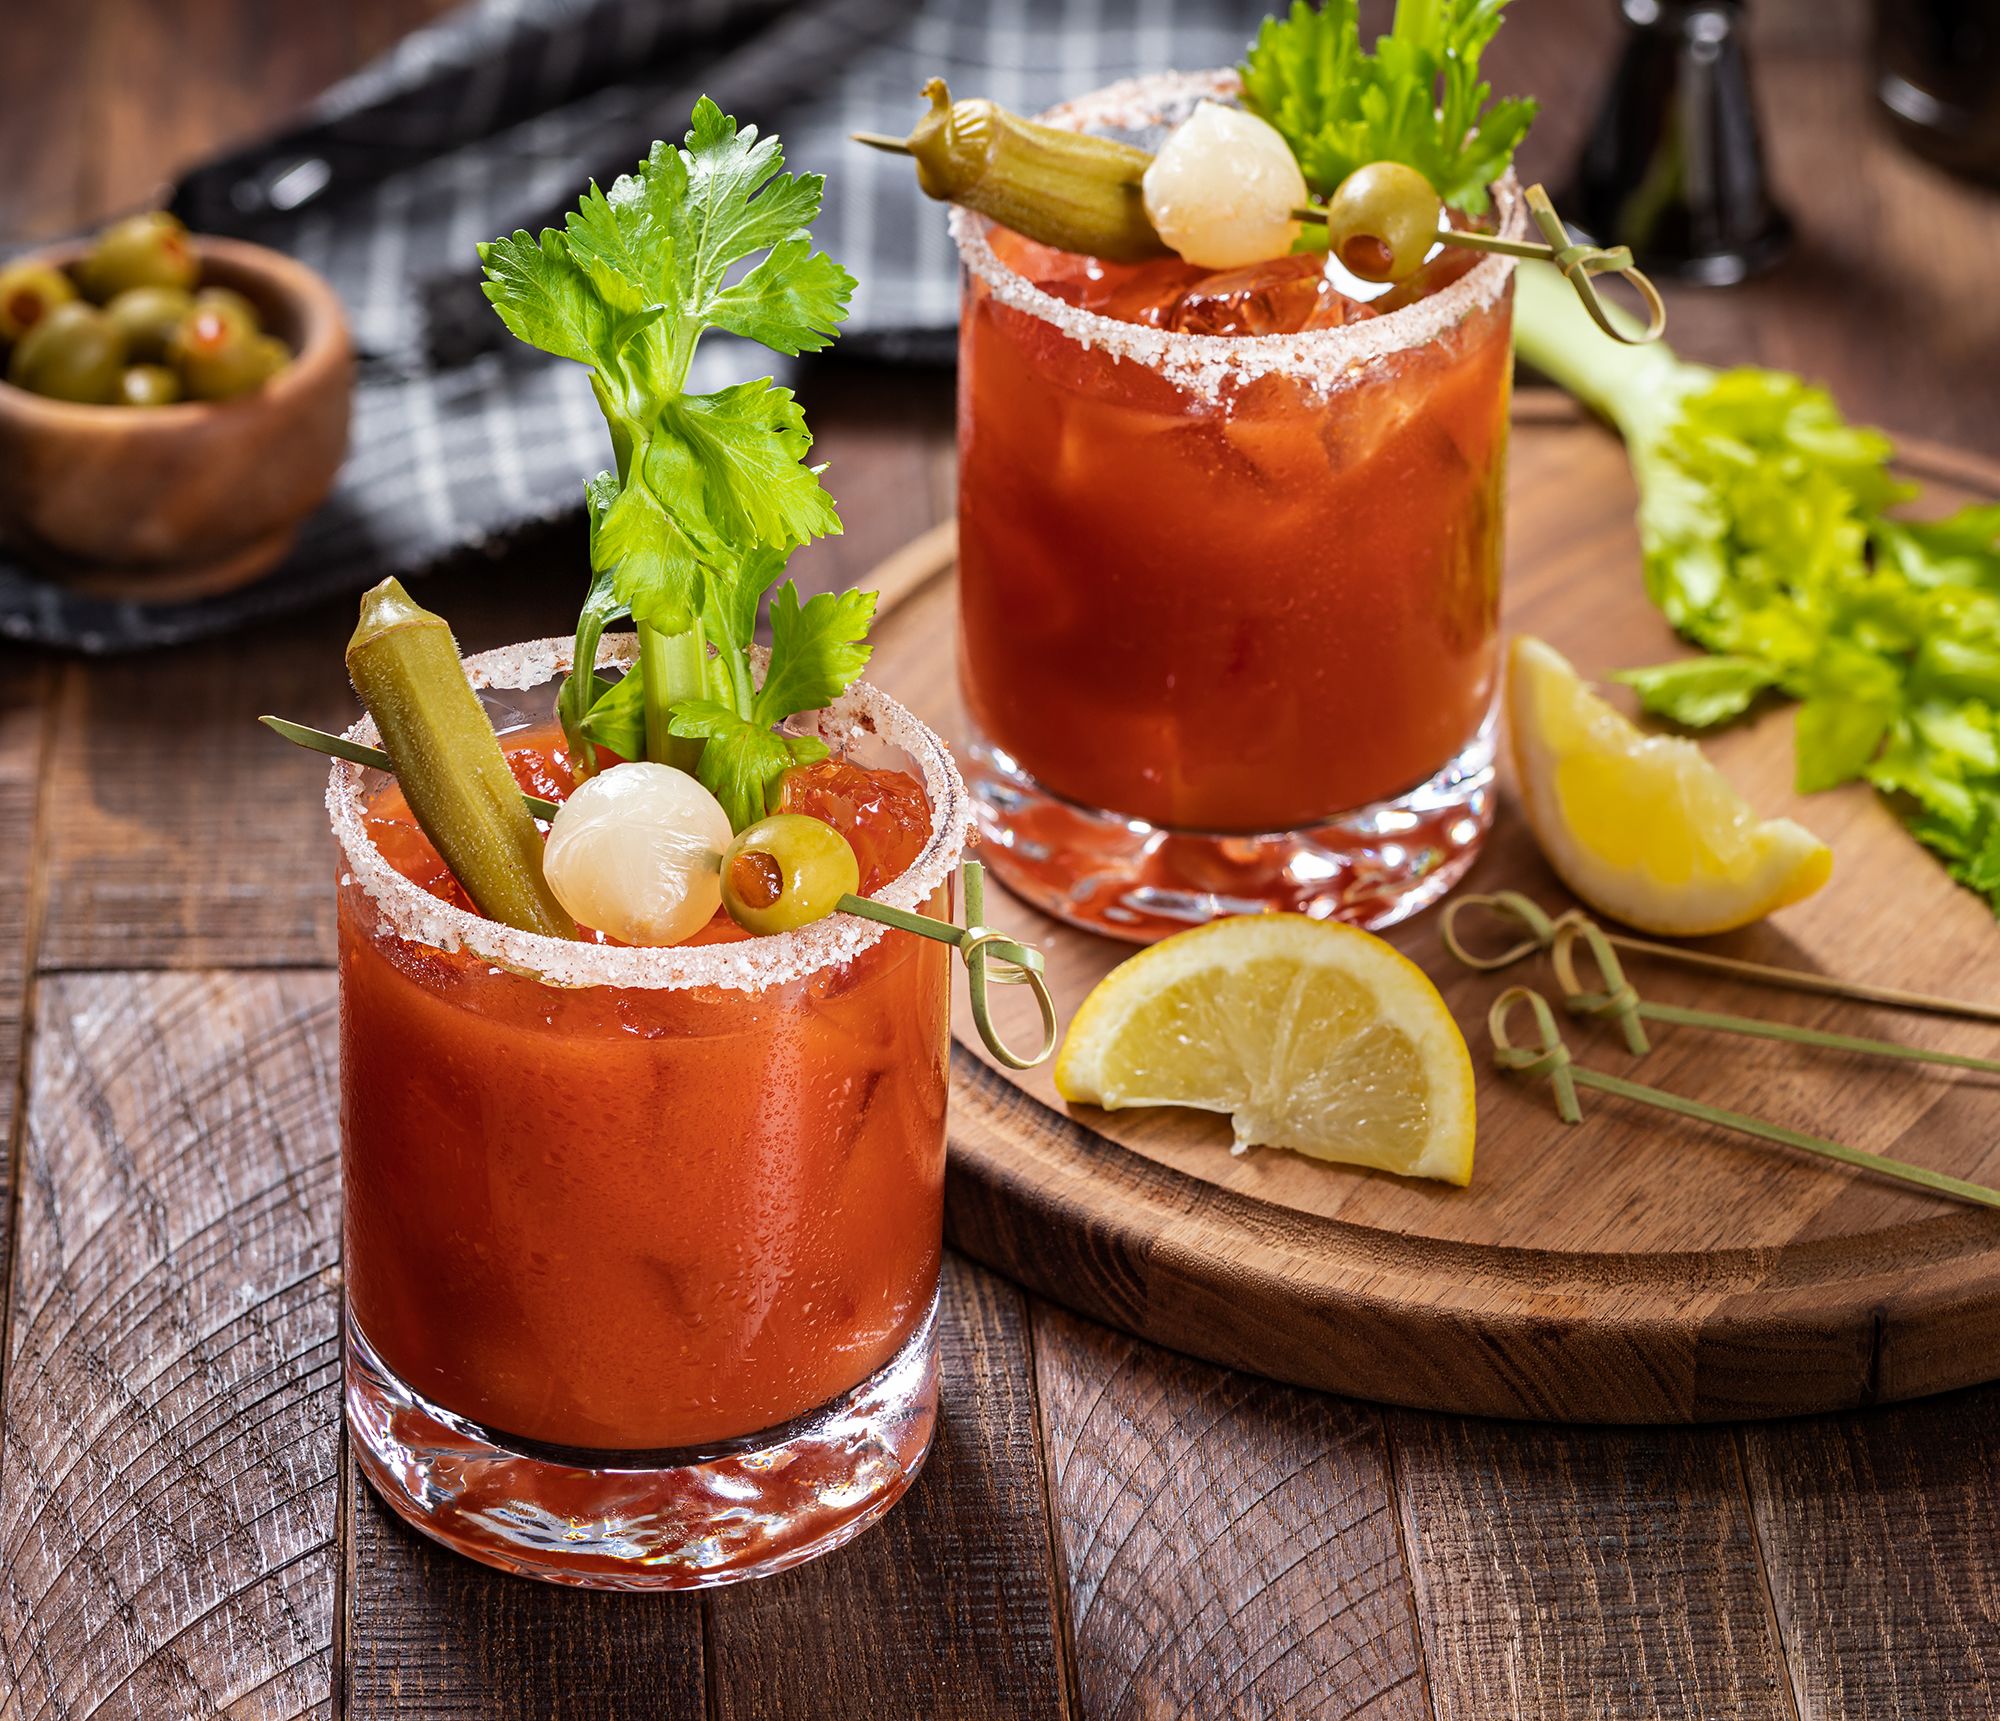 Bloody Mary Recipe - Fit Foodie Finds